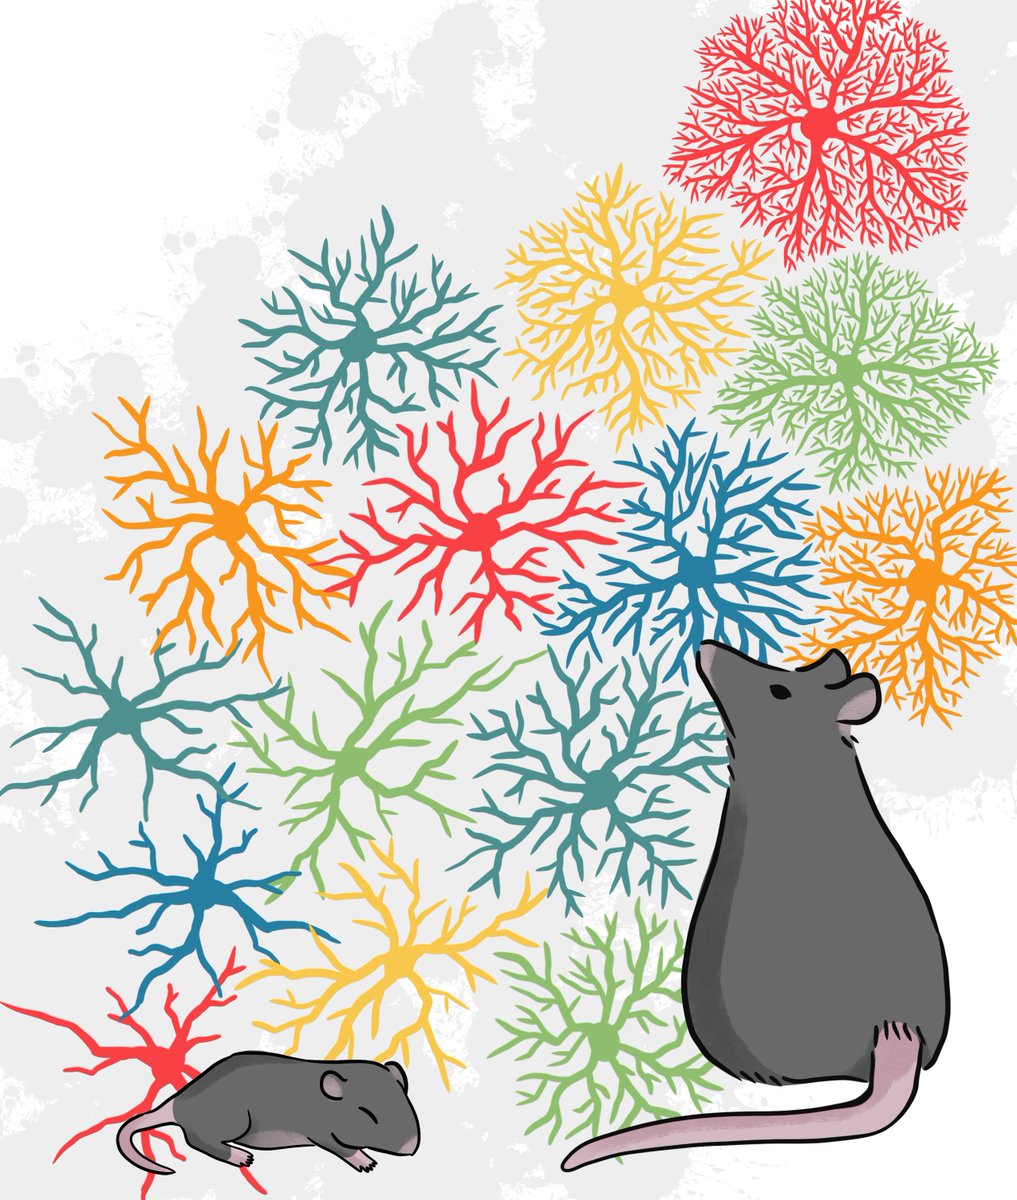 Our paper on mouse visual cortex astrocyte development is out! @Connieguocg @pj_sjostrom : sciencedirect.com/science/articl… Check it out and enjoy this illustration I made showing from bottom left to top right, astrocytes mature as a mouse develops from pup to adult.